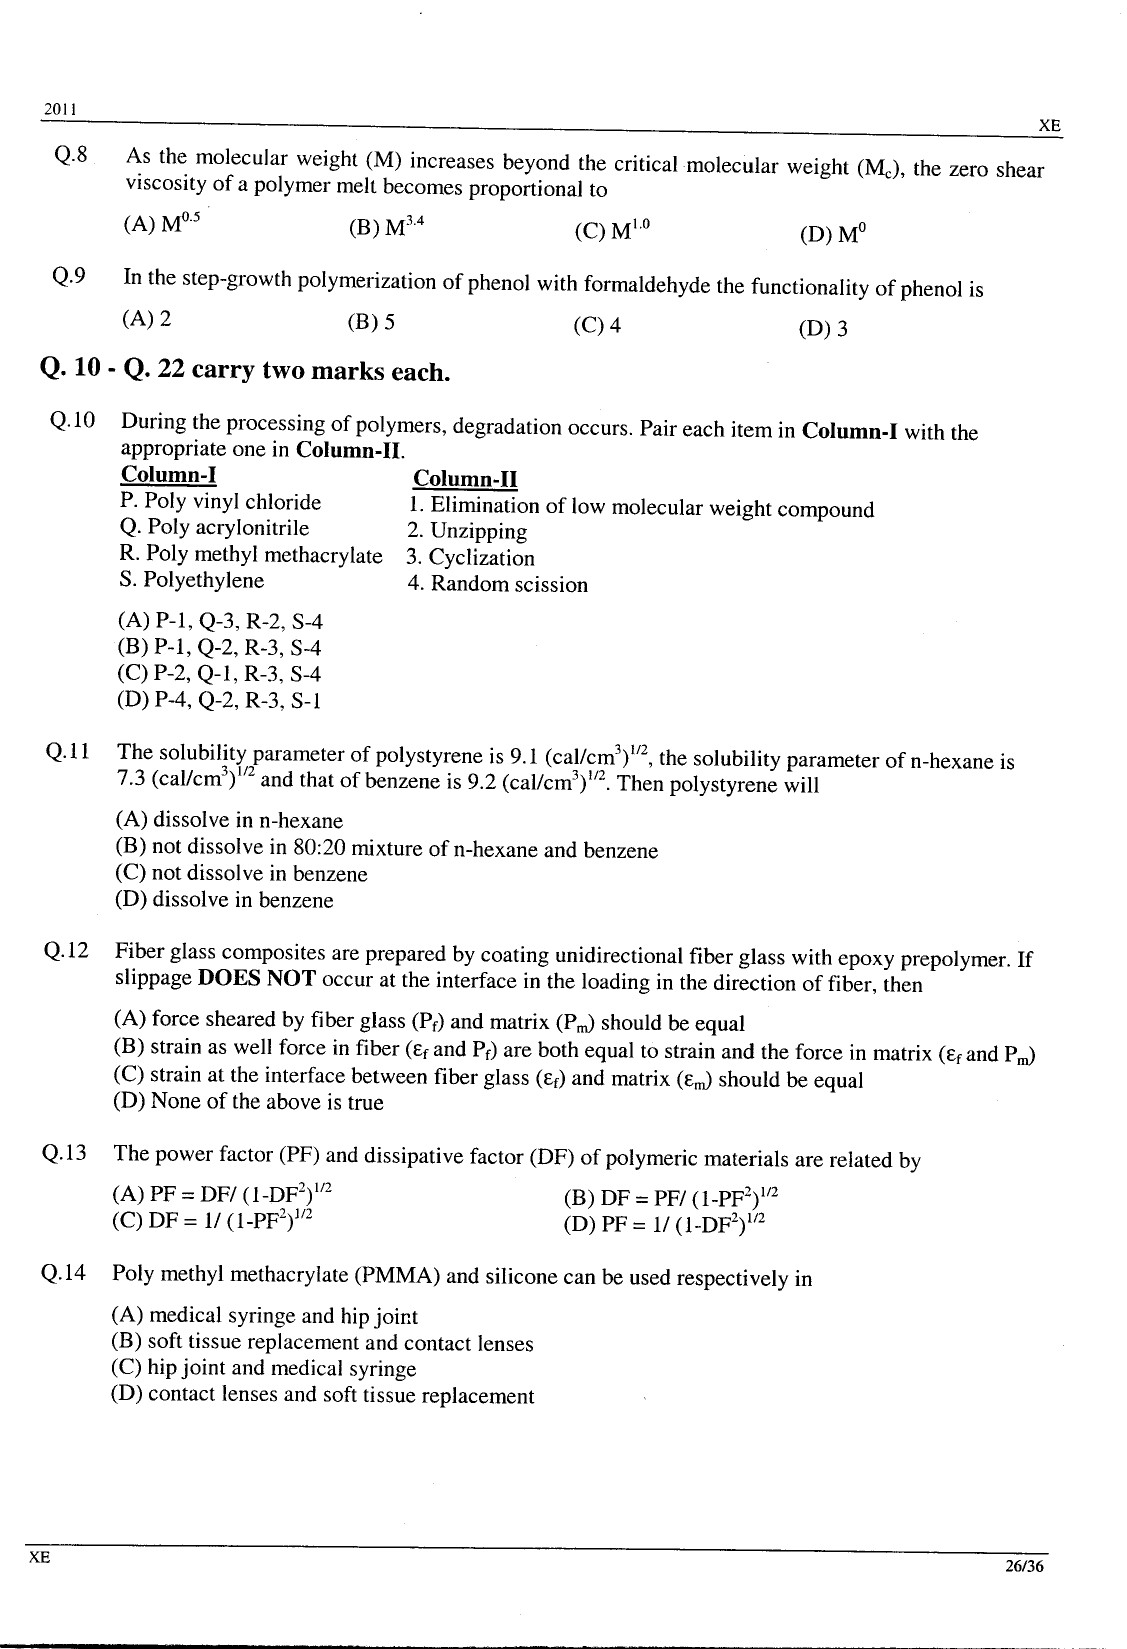 GATE Exam Question Paper 2011 Engineering Sciences 26